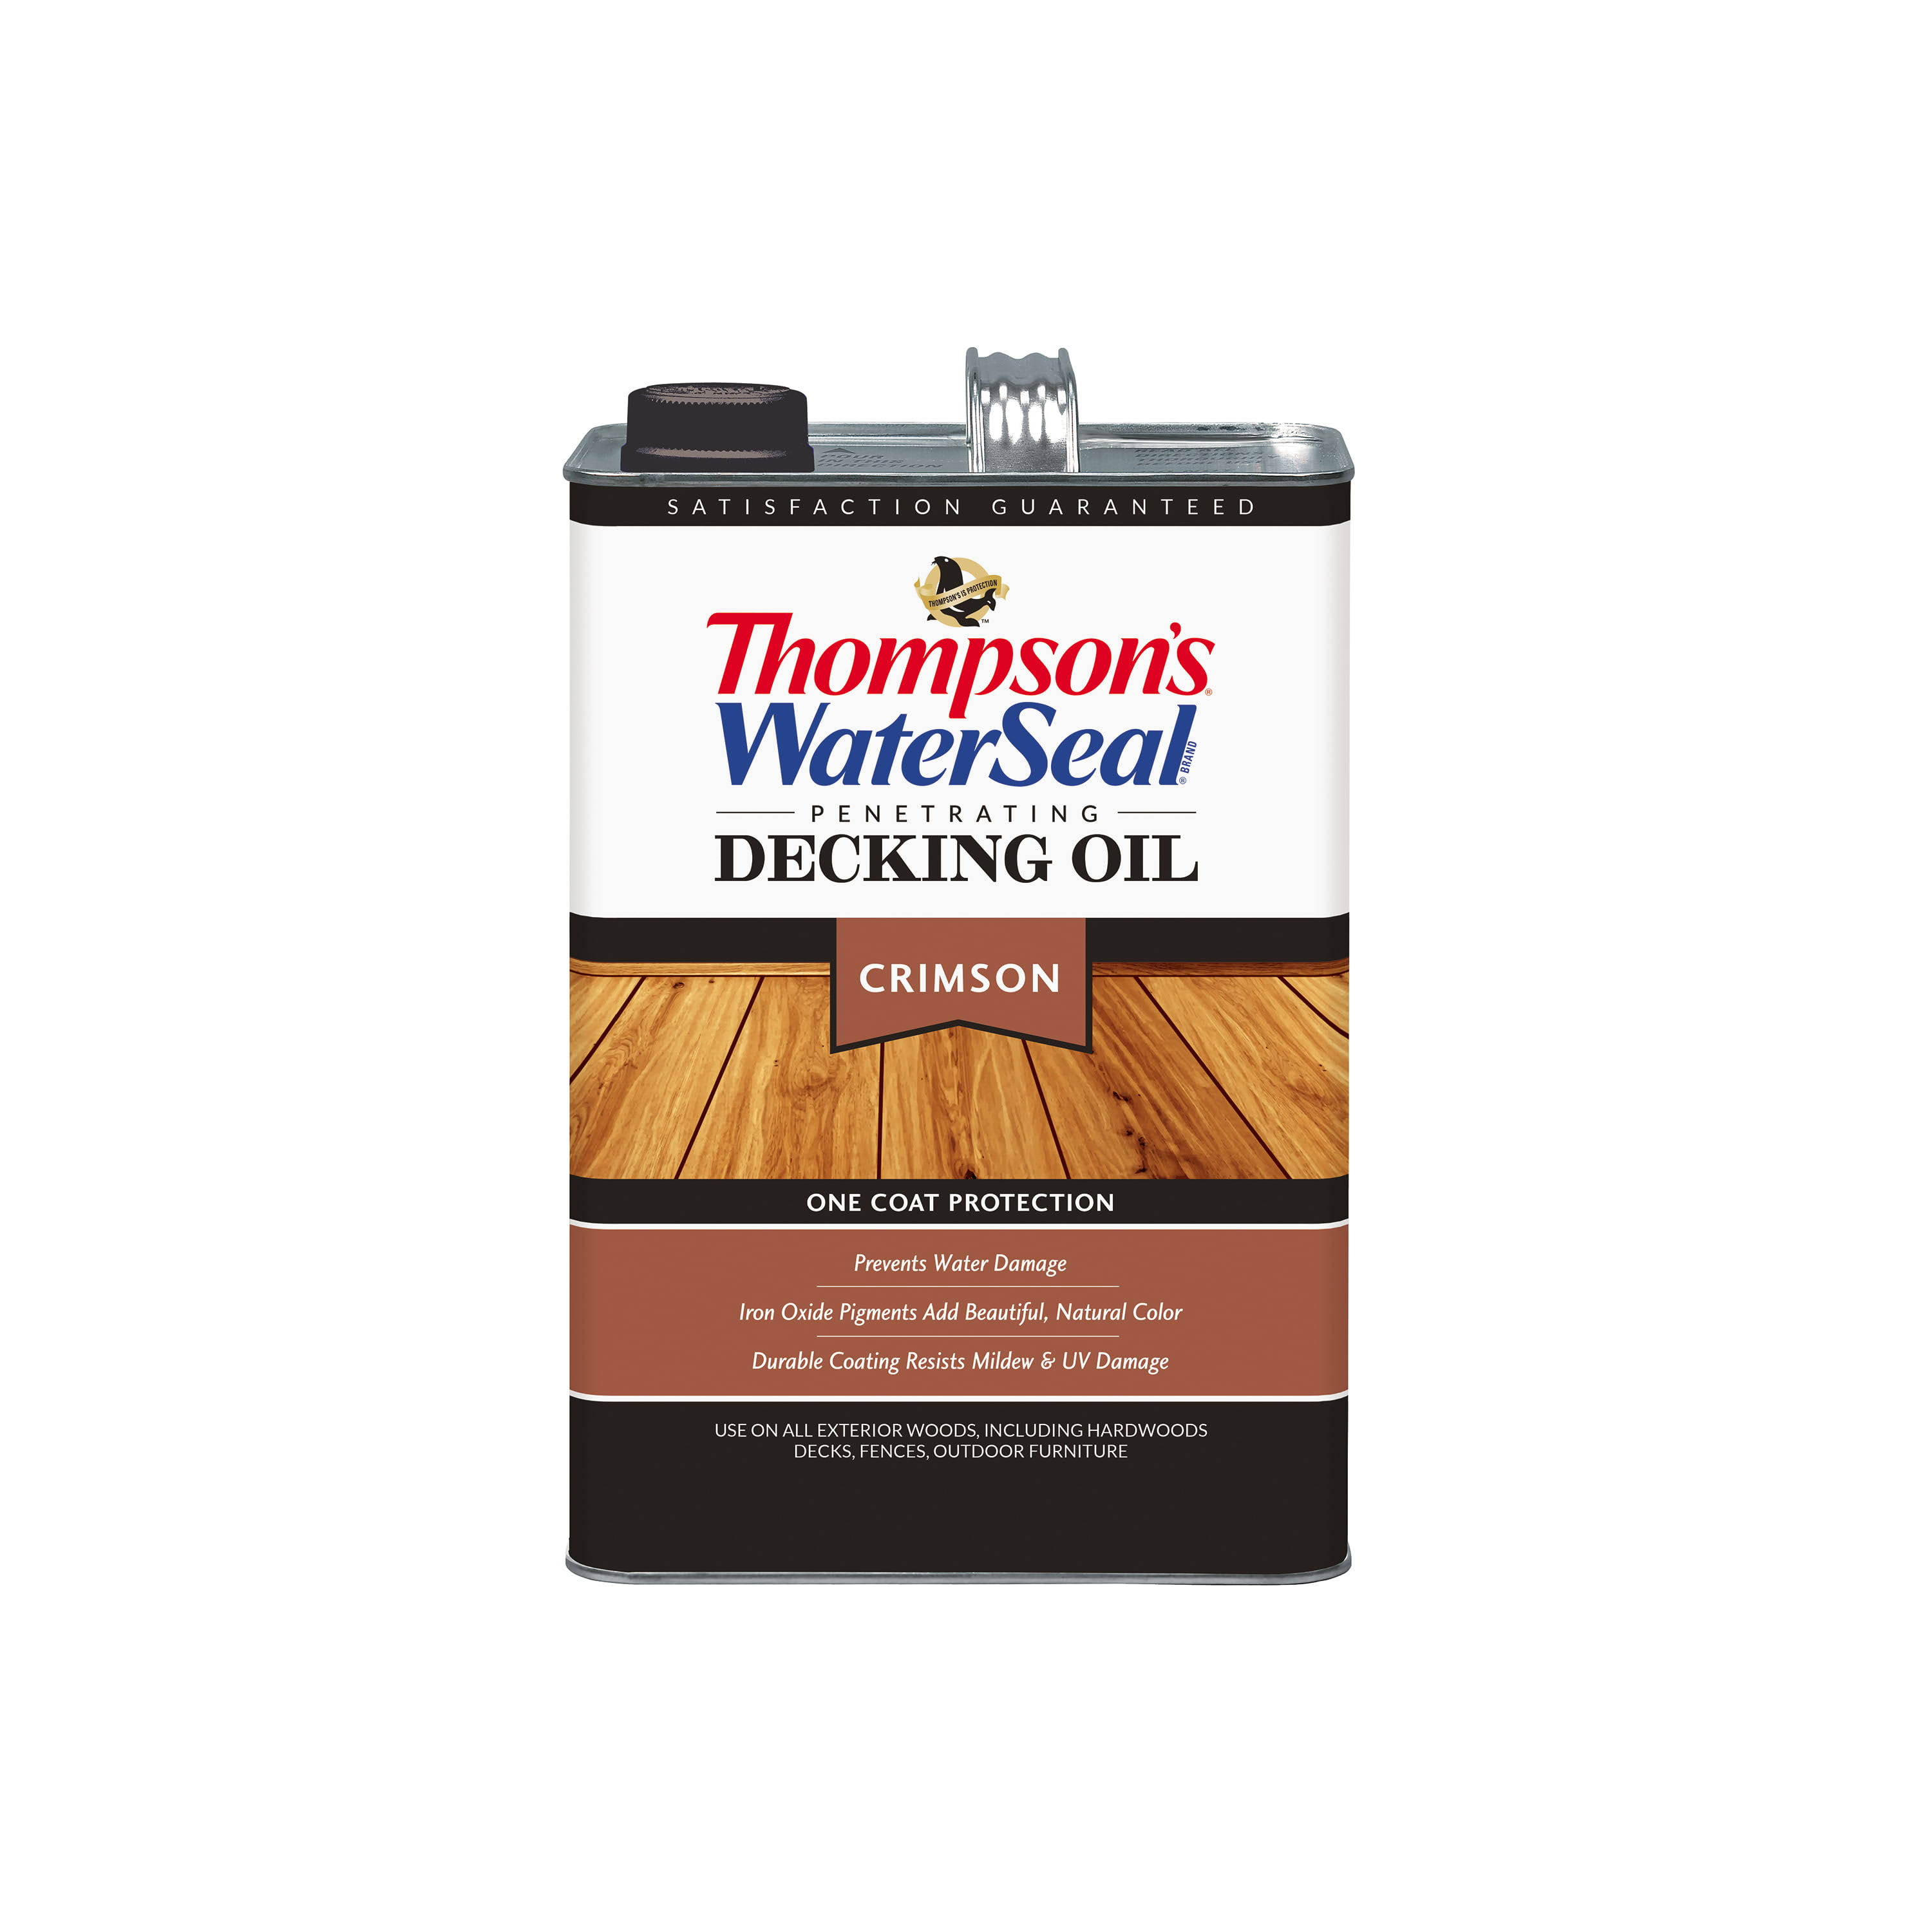 Thompson's Waterseal Penetrating Decking Oil, Crimson, 1-Gal | Garage | 30 Day Money Back Guarantee | Delivery Guaranteed